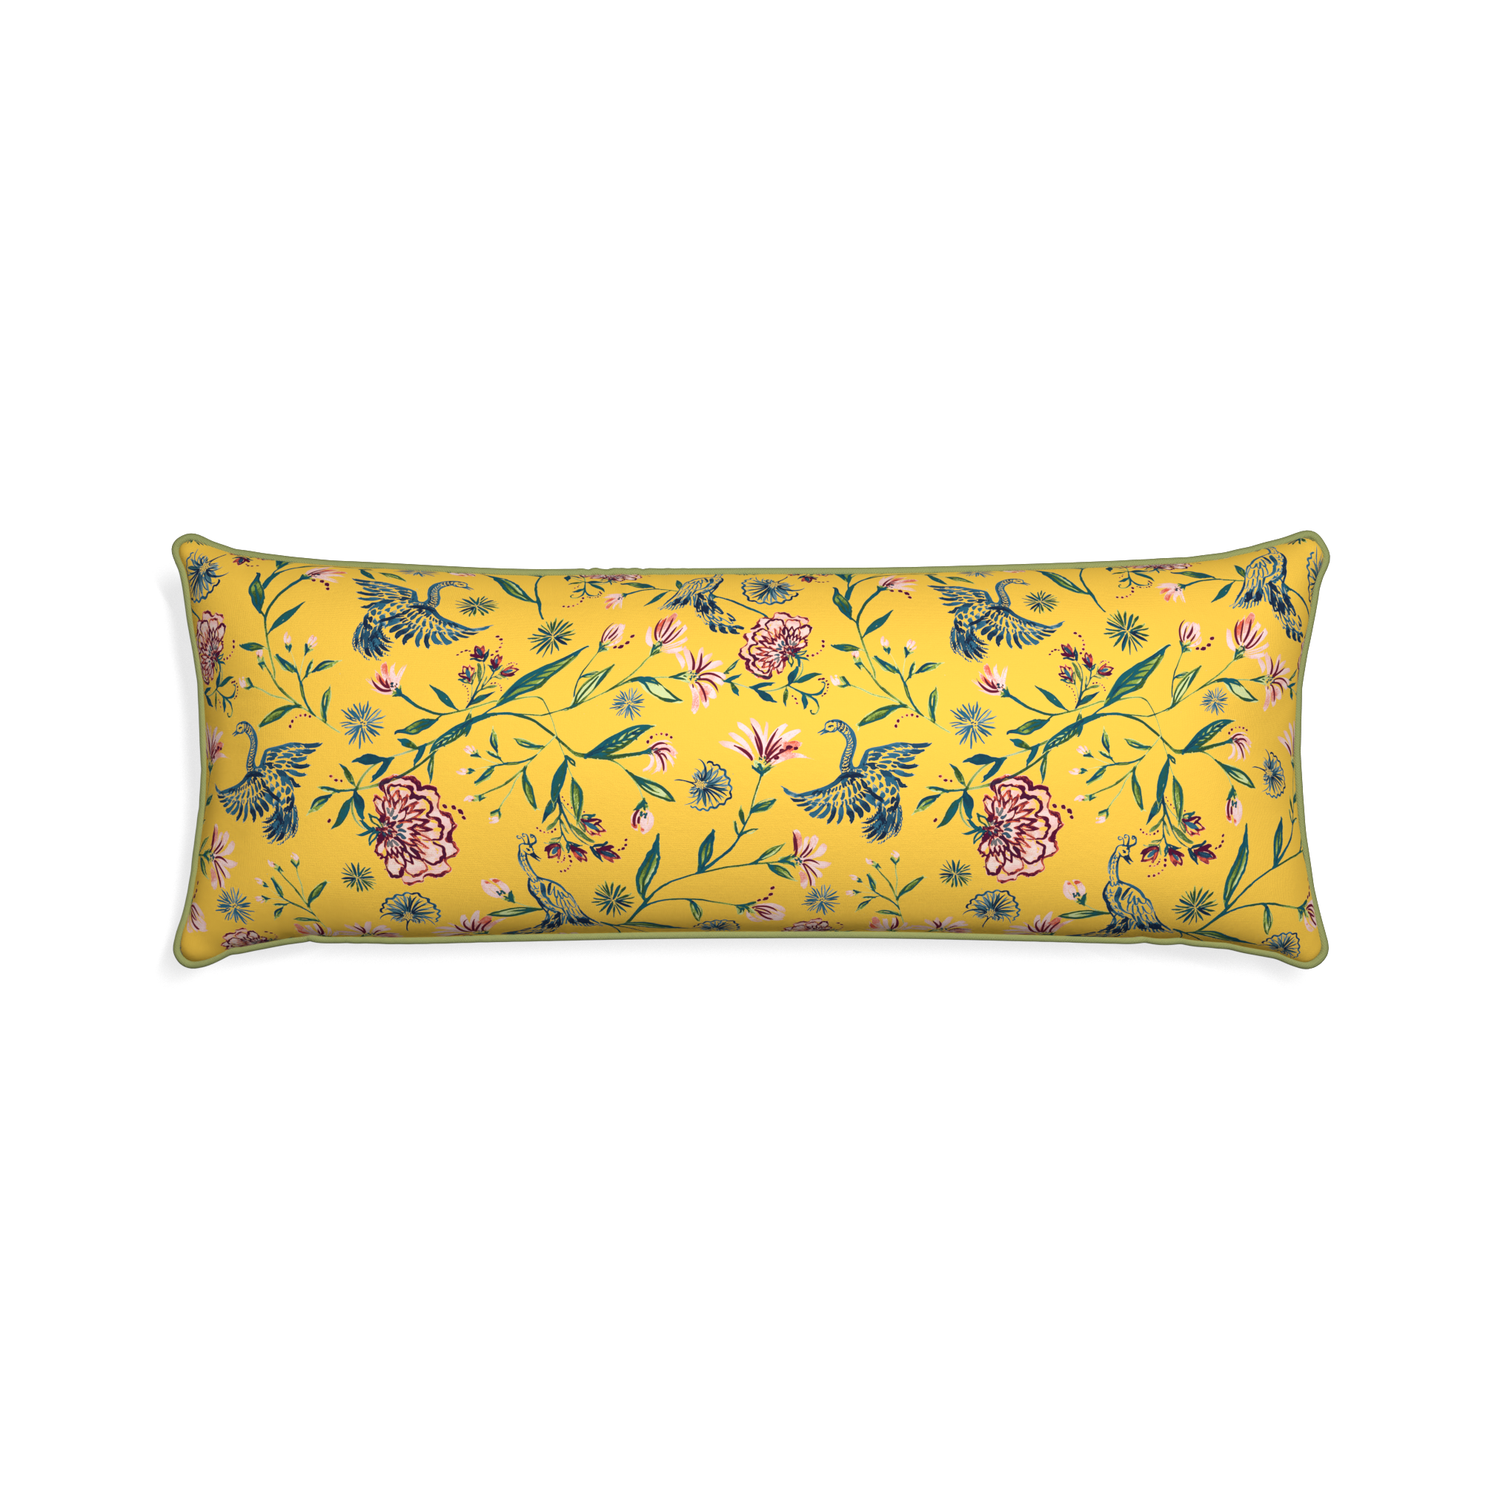 Xl-lumbar daphne canary custom yellow chinoiseriepillow with moss piping on white background